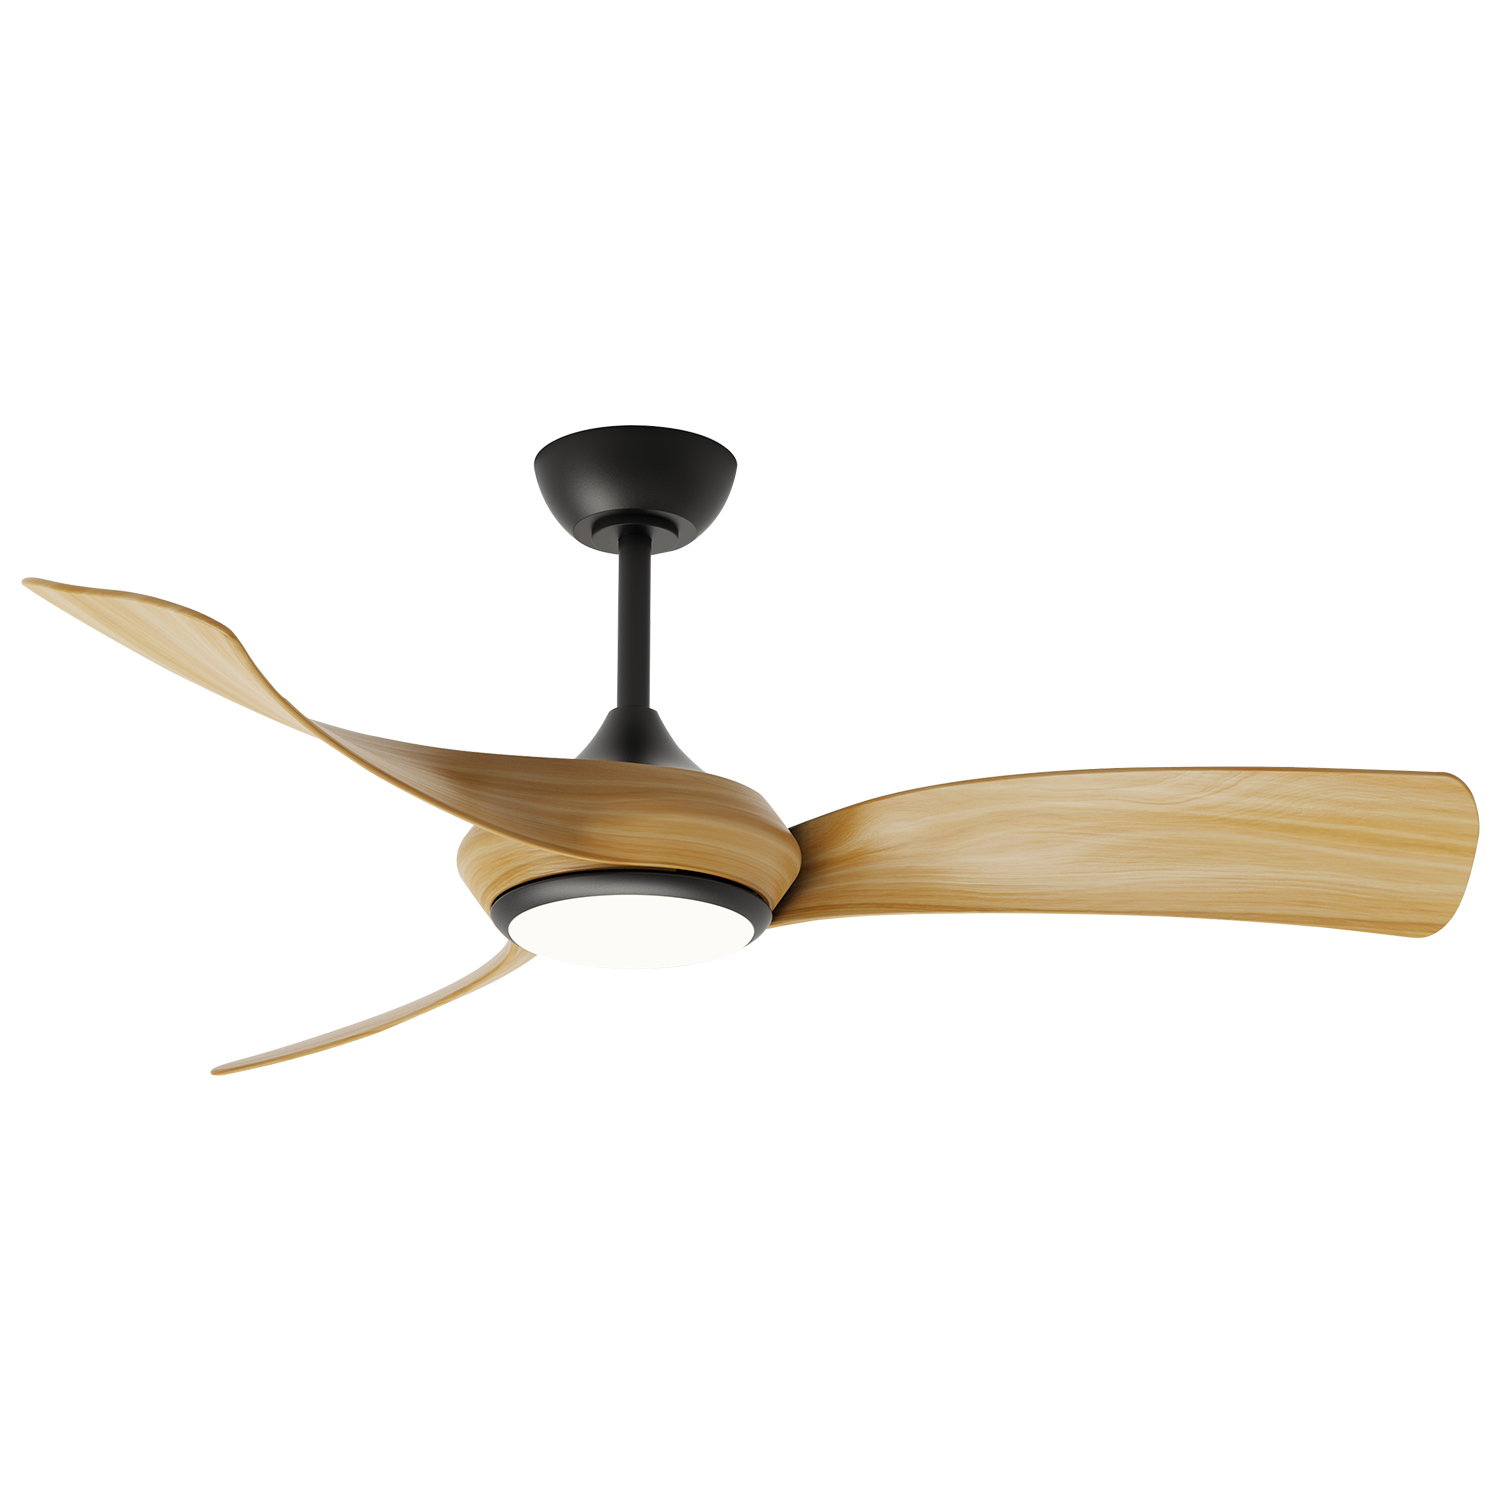 Remote Controlled Ceiling Fan: A Convenient Cooling Solution